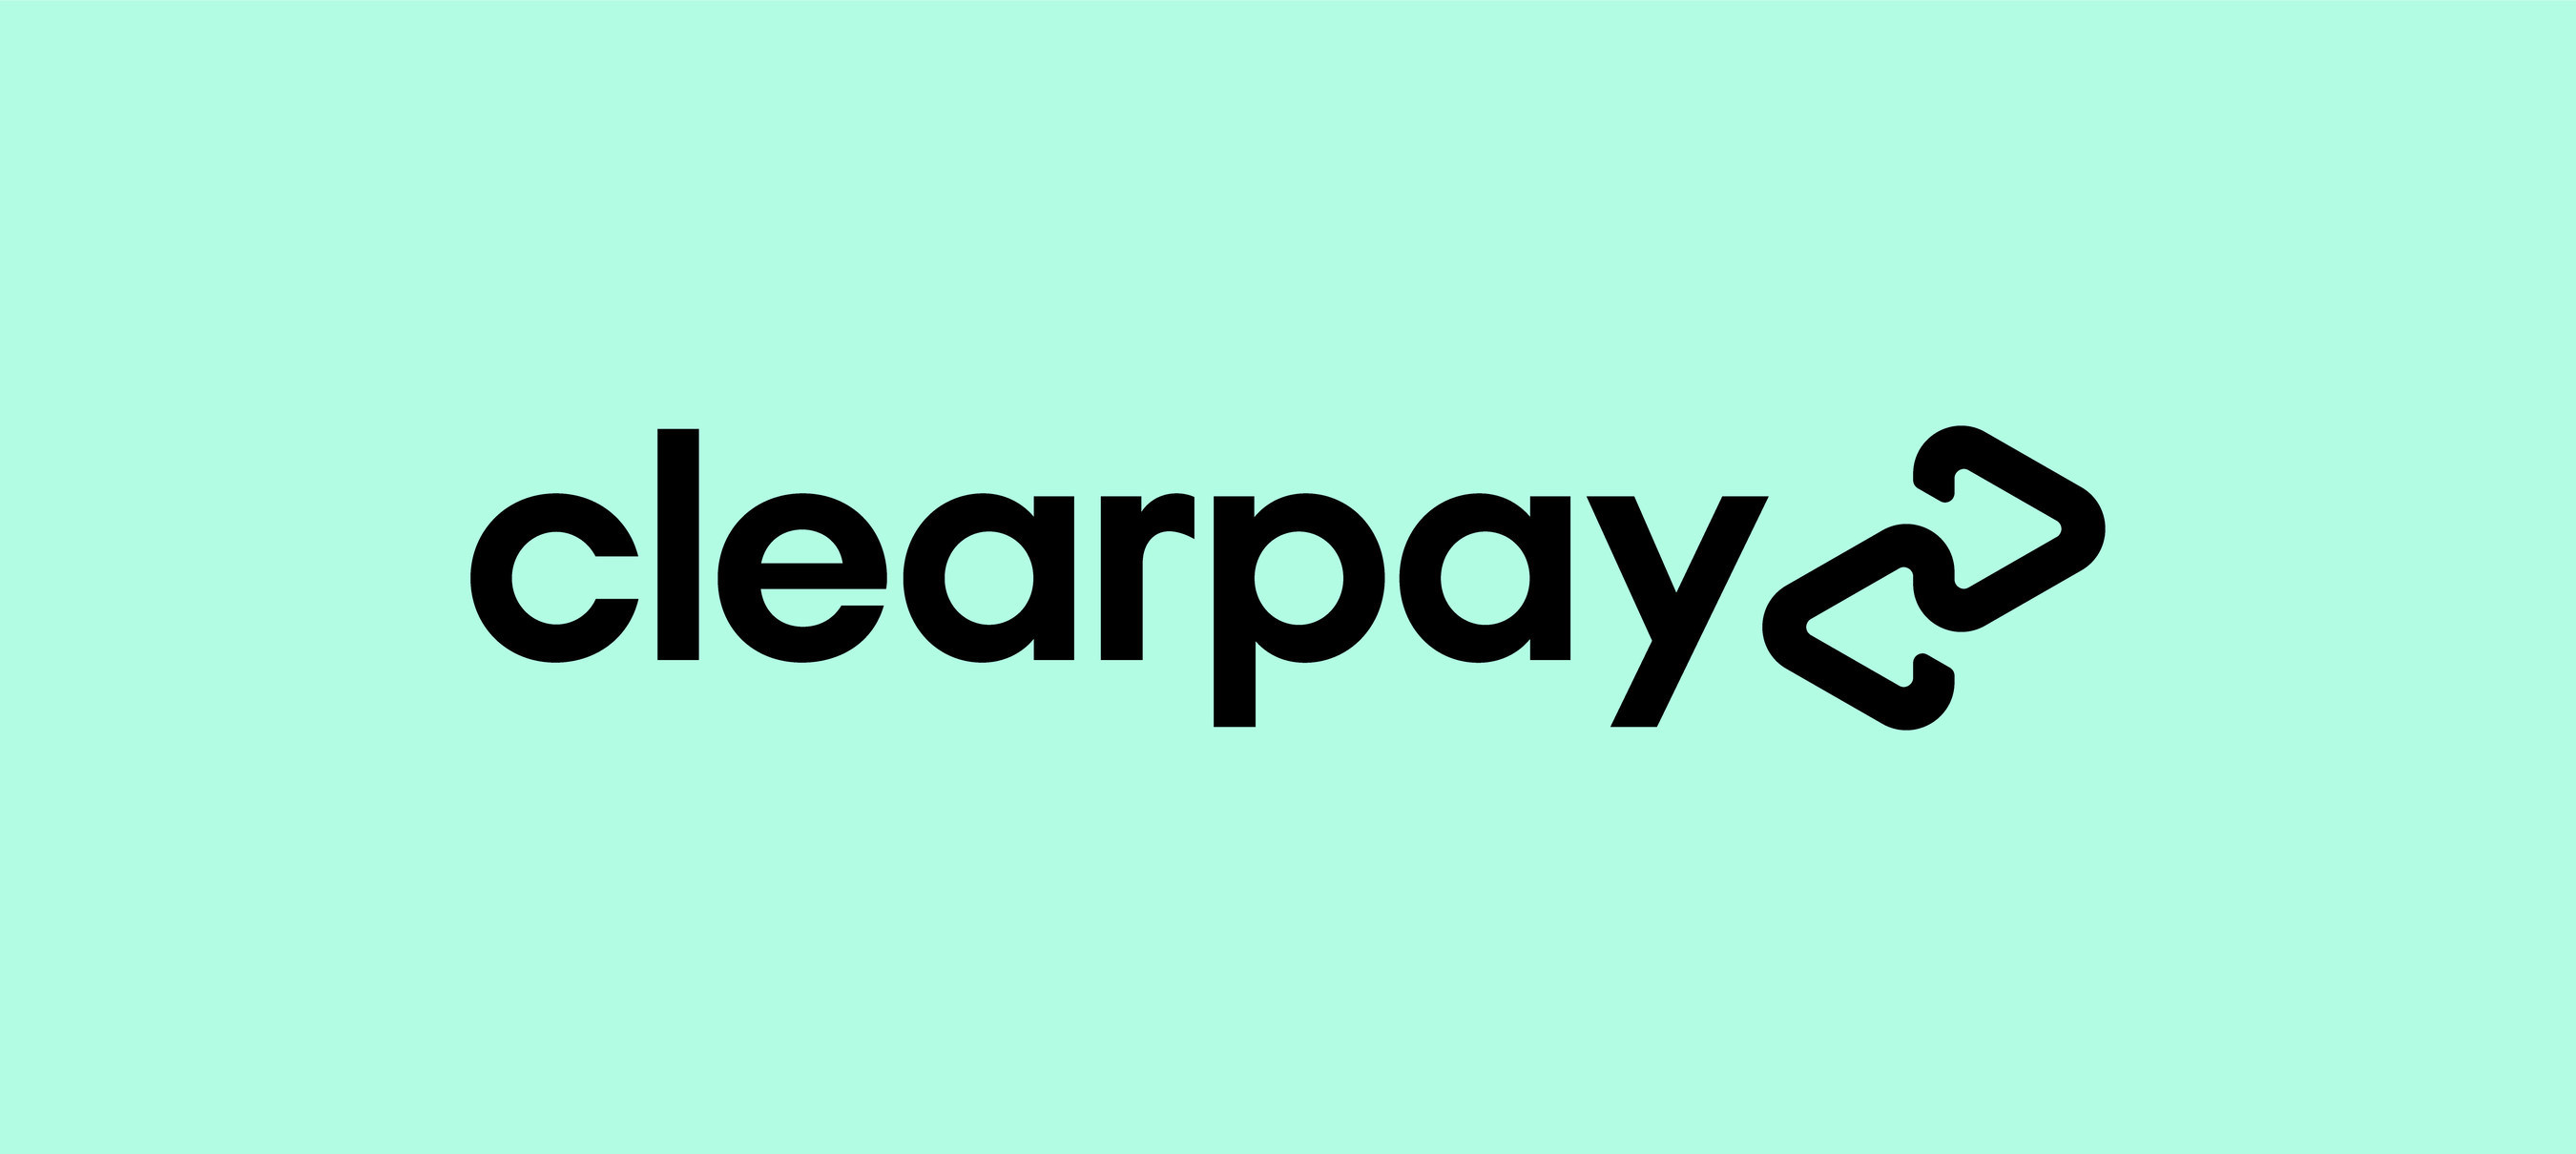 Unibail-Rodamco-Westfield Announces Partnership with Clearpay